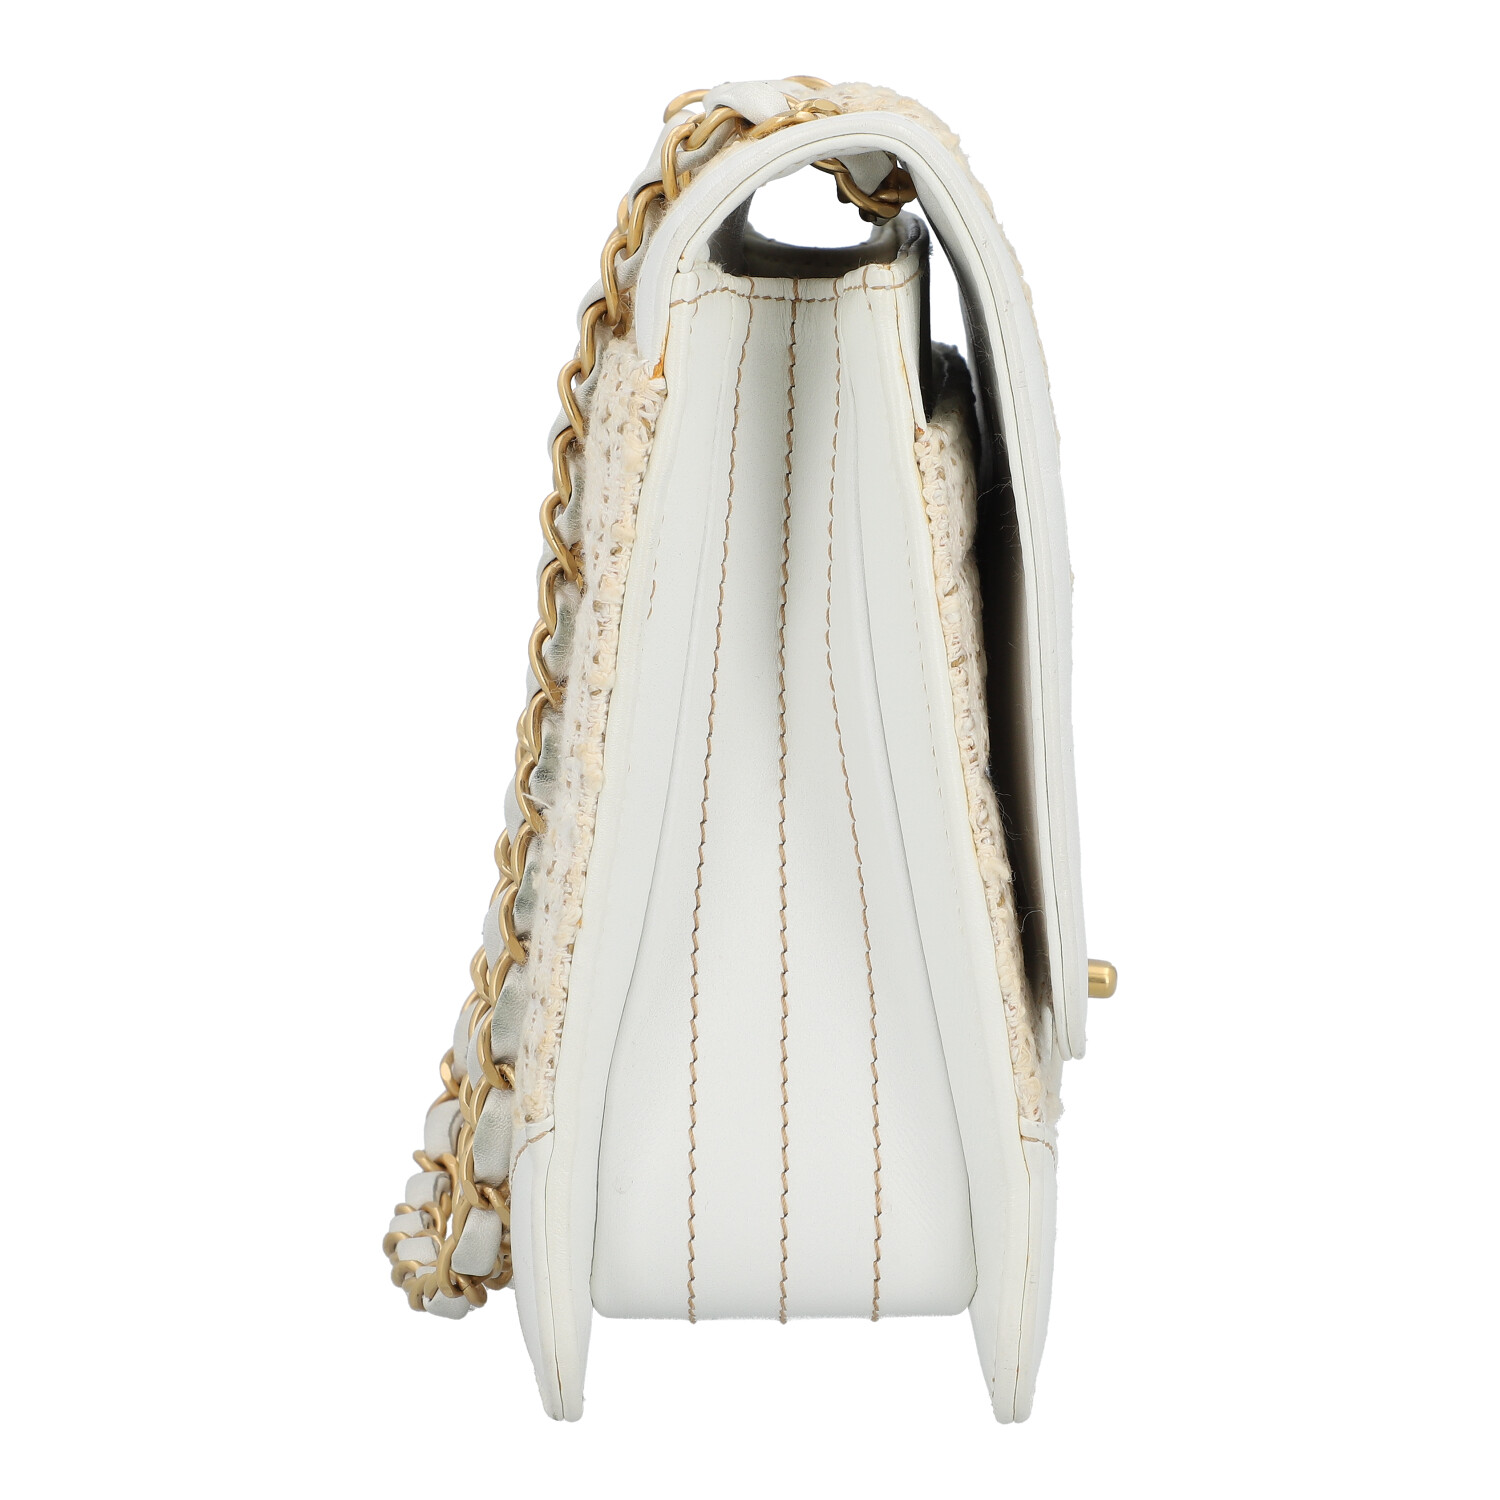 CHANEL VINTAGE Schultertasche "FLAP BAG", Koll.: 2000 - 2002. - Image 3 of 8